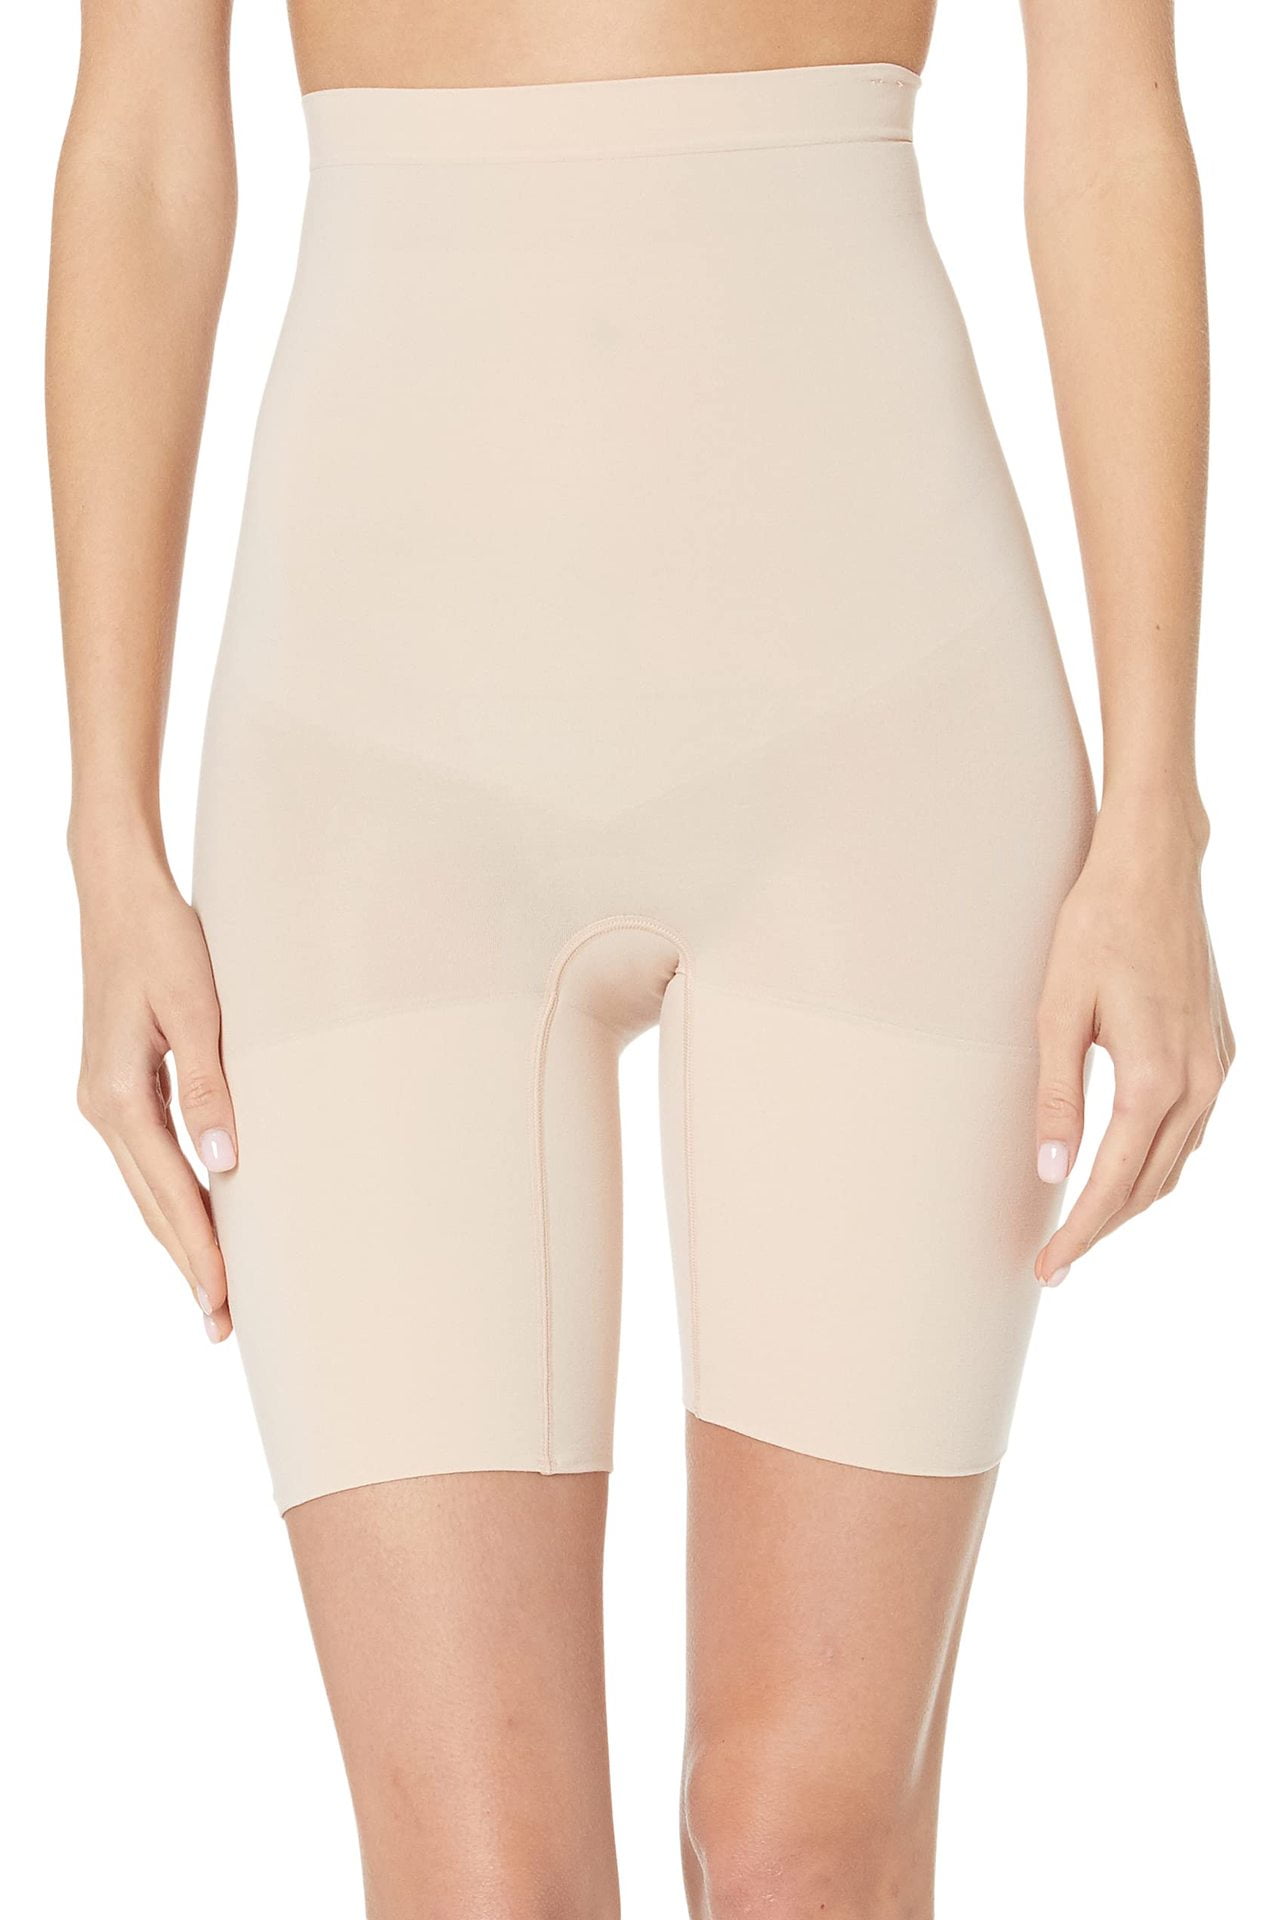 Spanx Higher Power Shorts 2745 – From Head To Hose